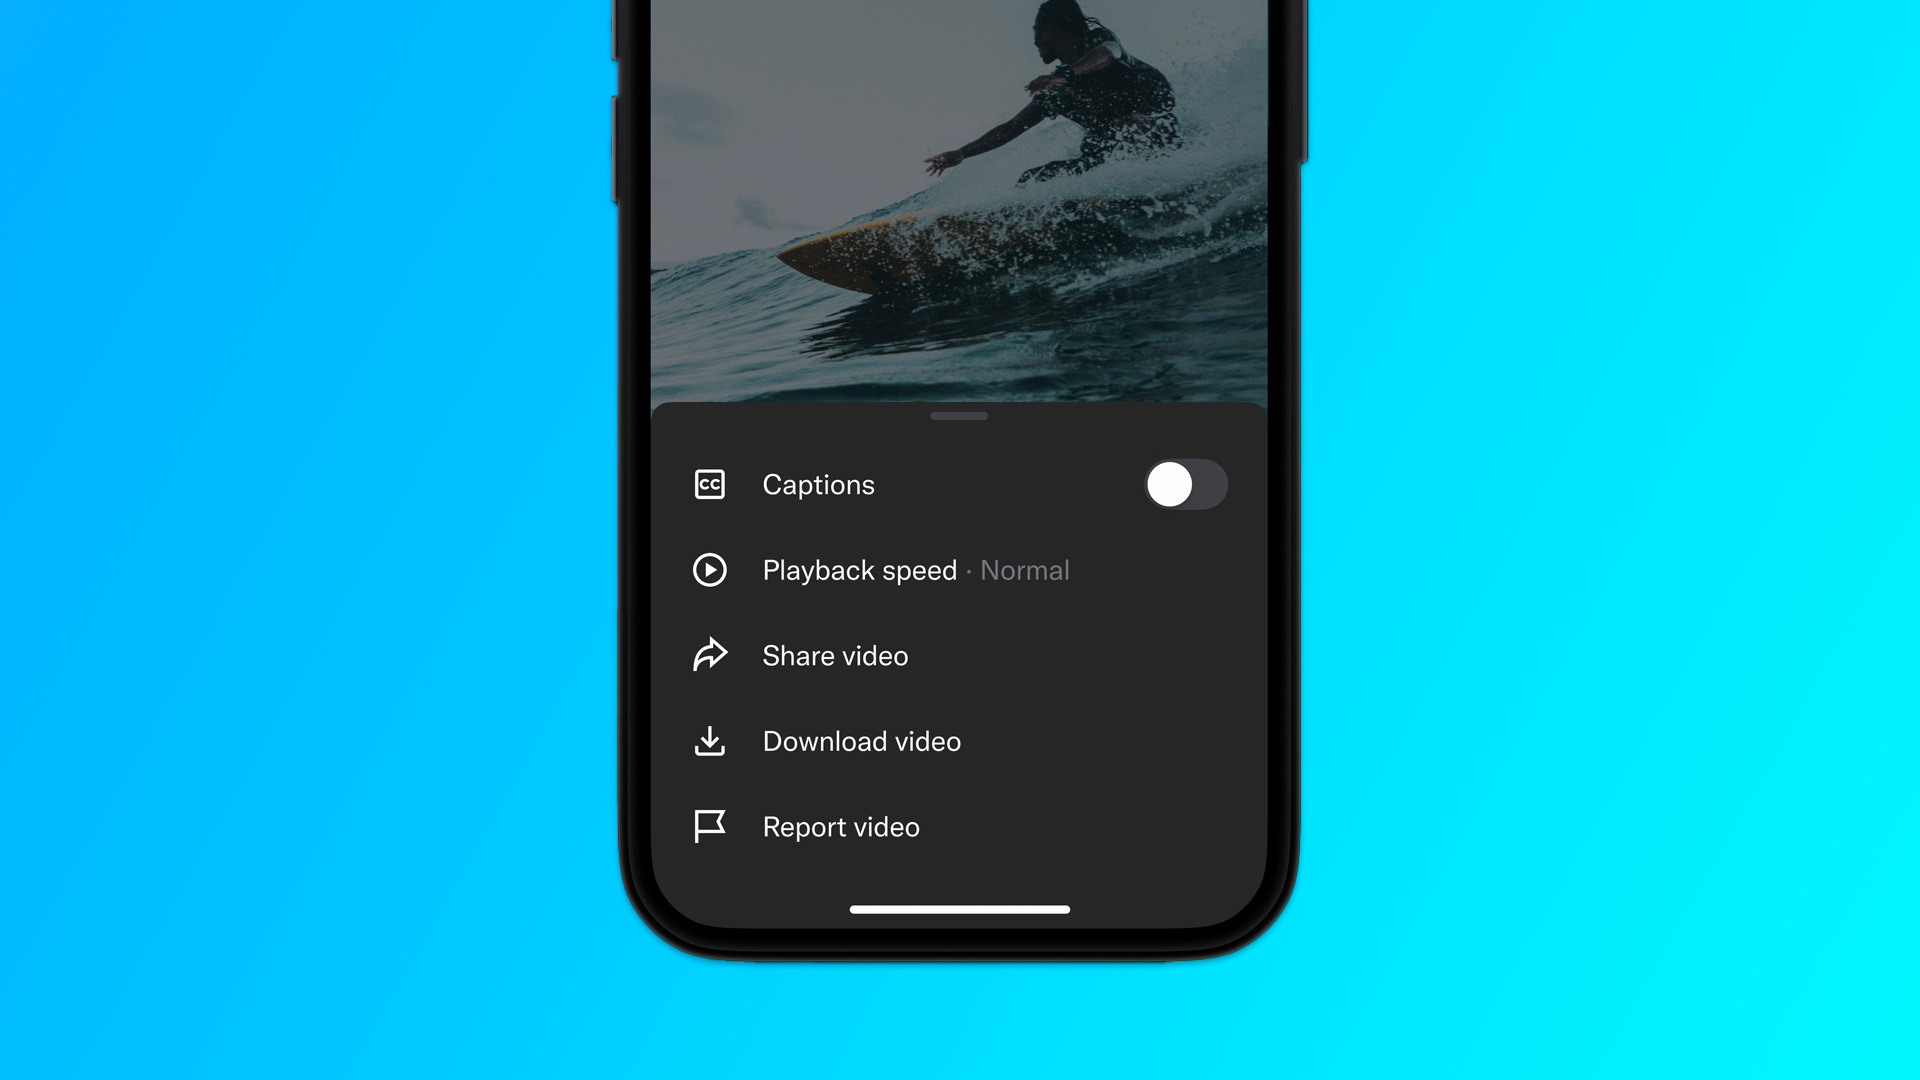 Twitter teases new video-related features coming soon